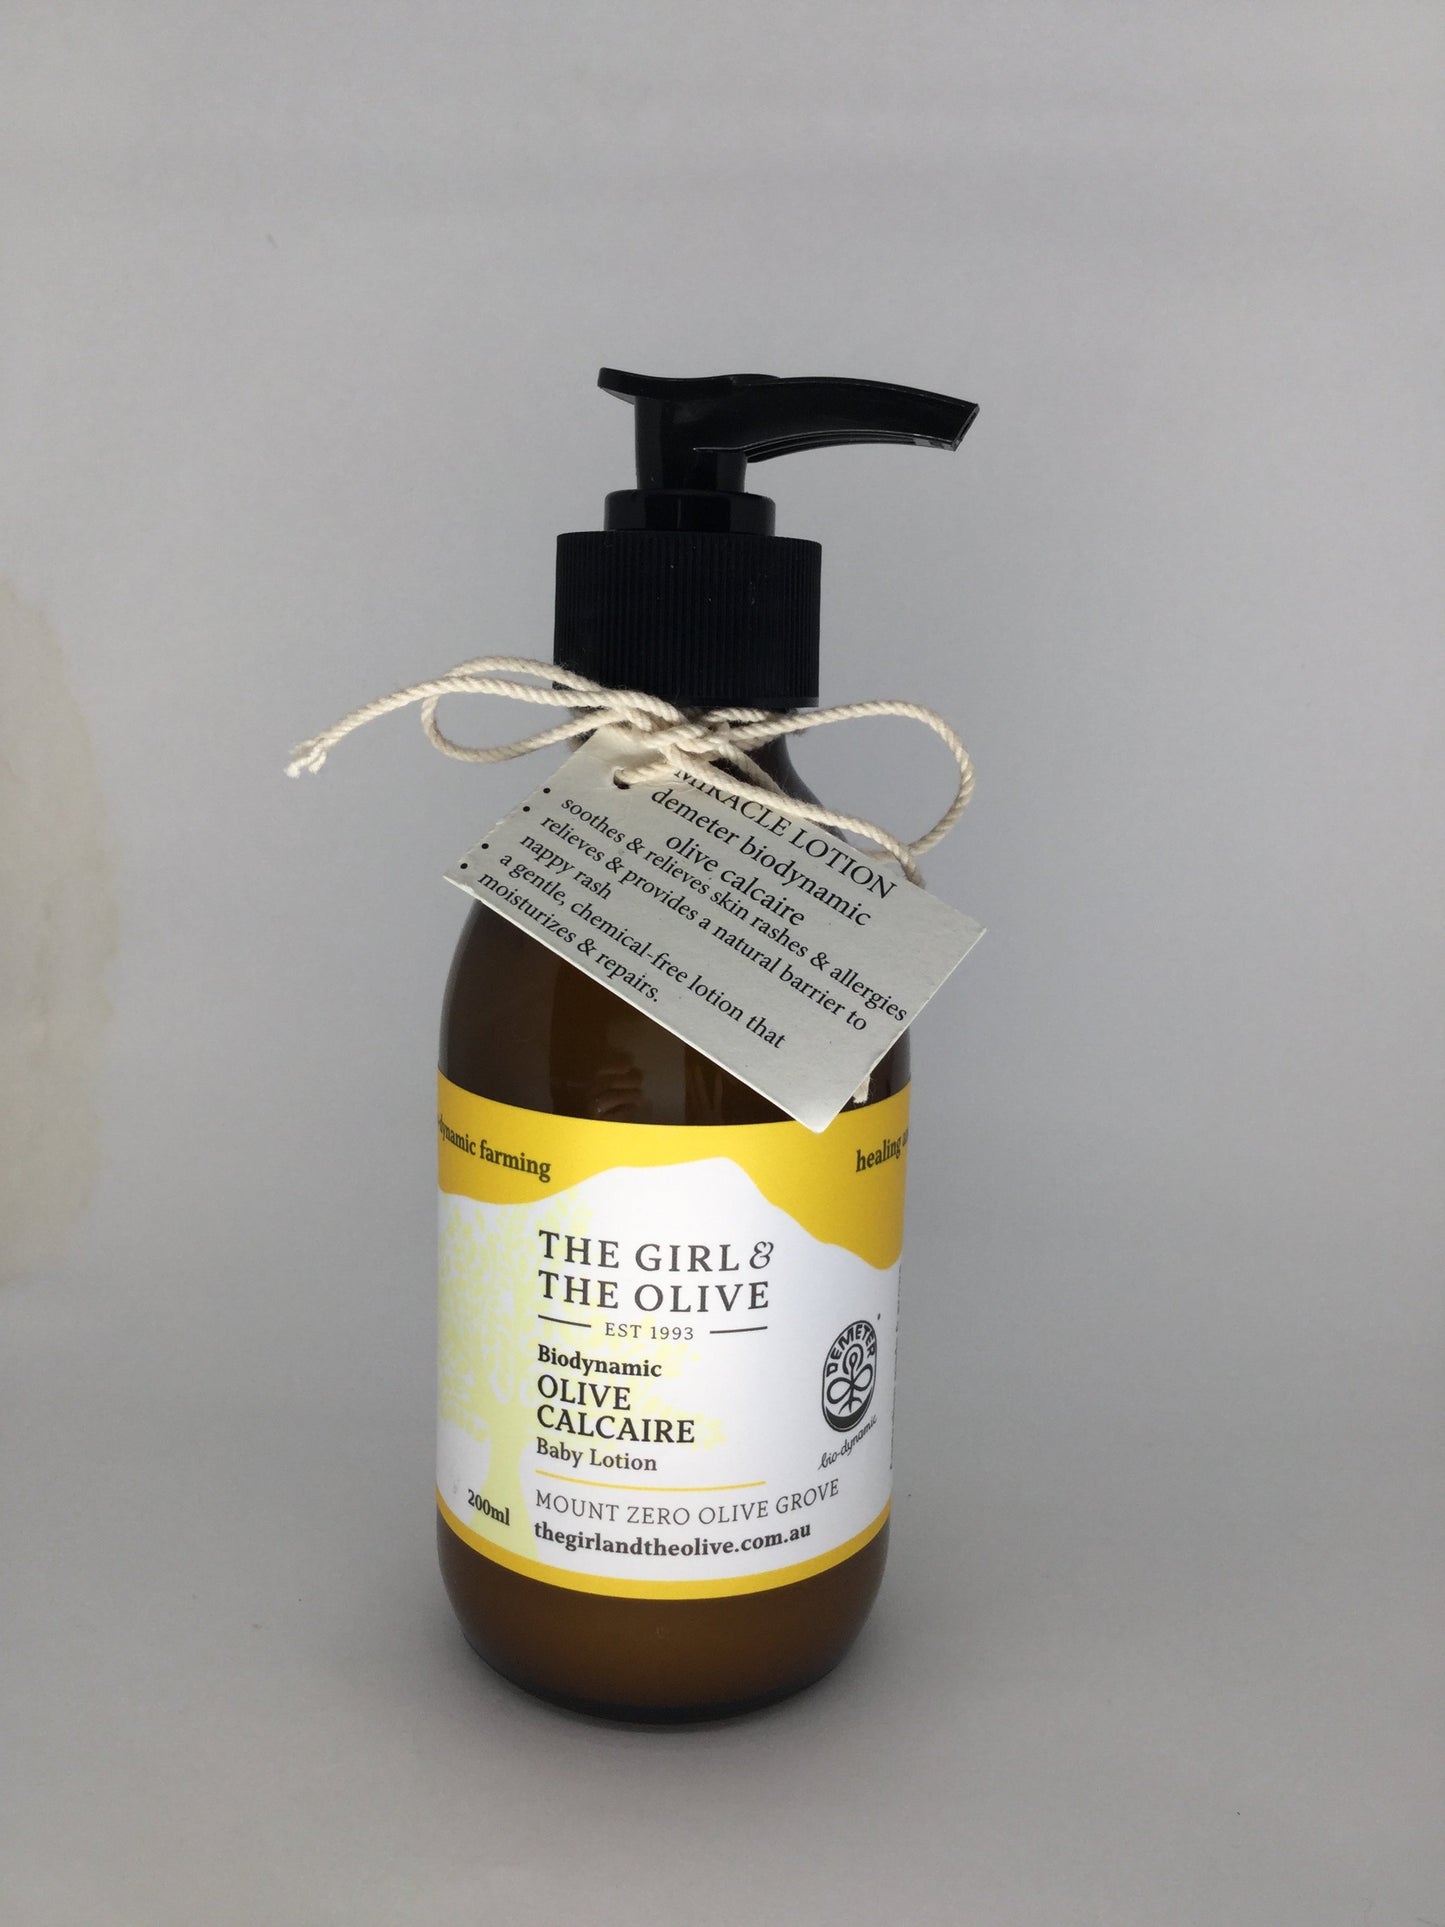 Biodynamic Olive Calcaire Lotion Baby